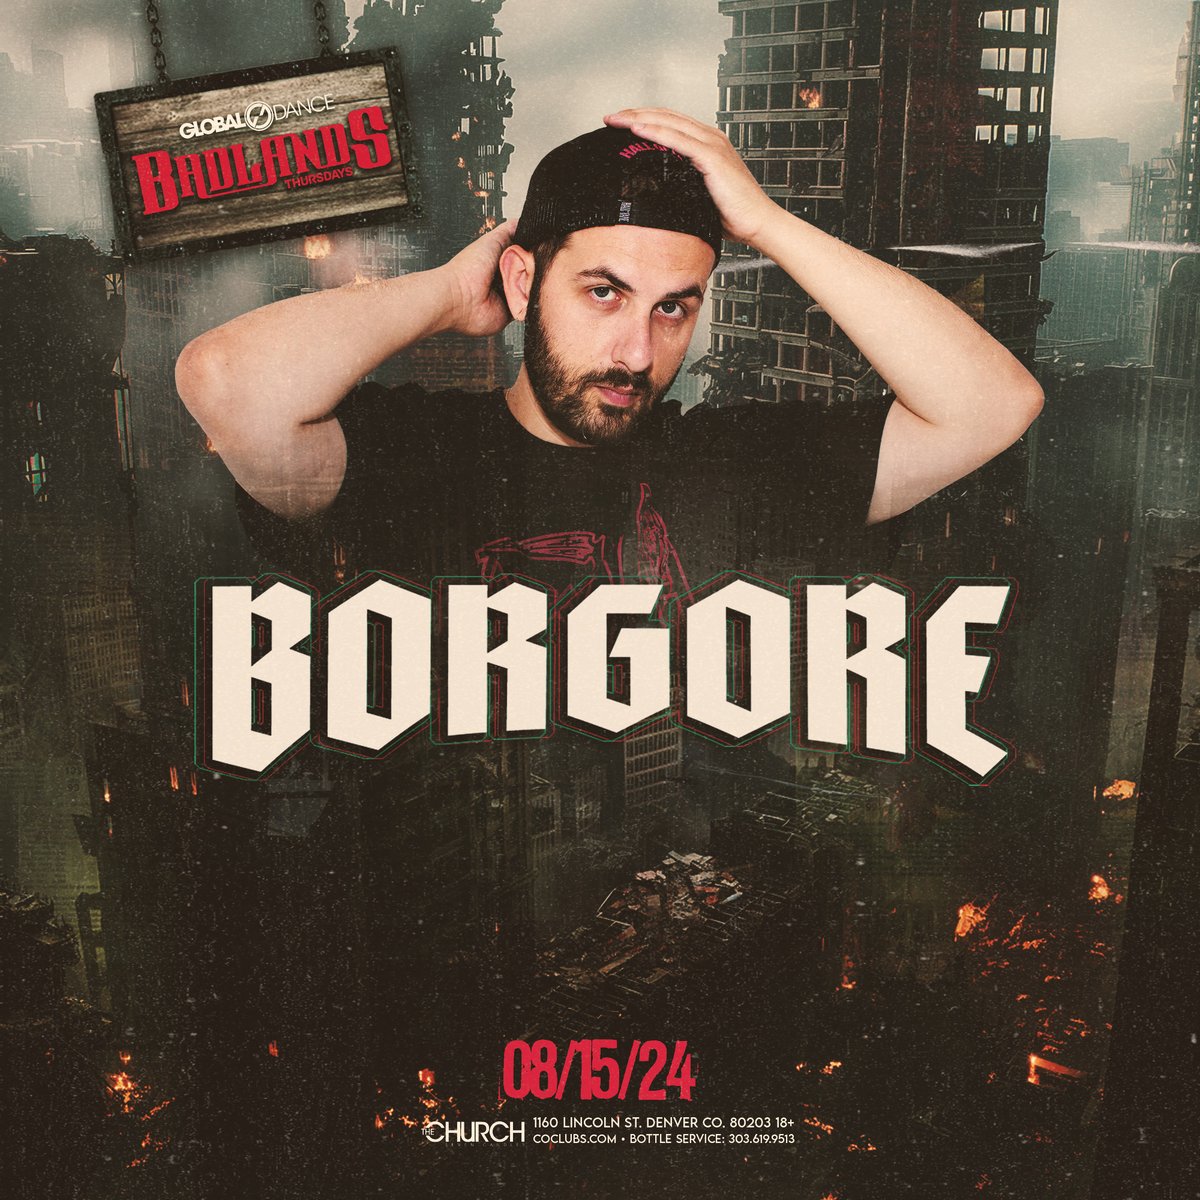 🚨 JUST ANNOUNCED 🚨 One of the dubstep OGs @Borgore is coming through to tear up the Badlands on August 15th at @ChurchNightClub 😈 Buy your tickets here ⏩ bit.ly/badlandsxborgo…